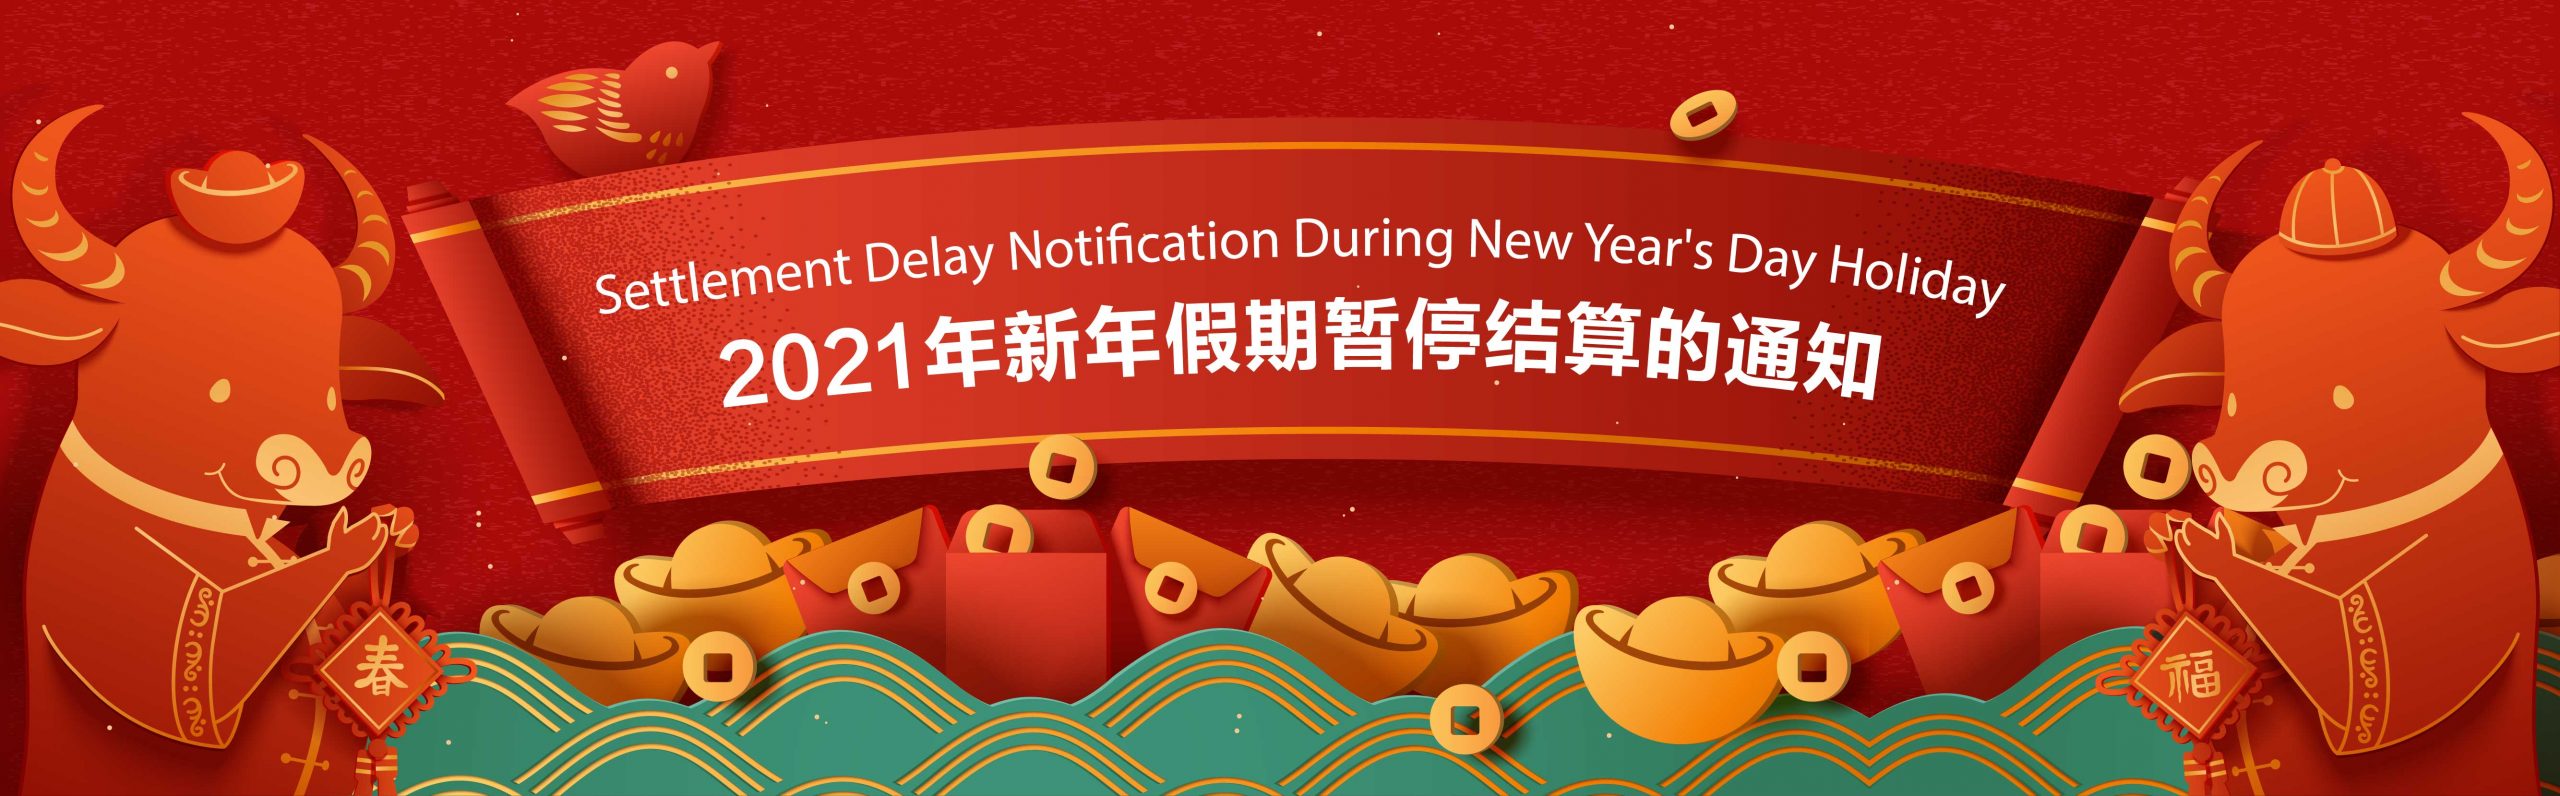 Settlement Delay Notification During New Year’s Day Holiday 关于2021年新年假期暂停结算的通知